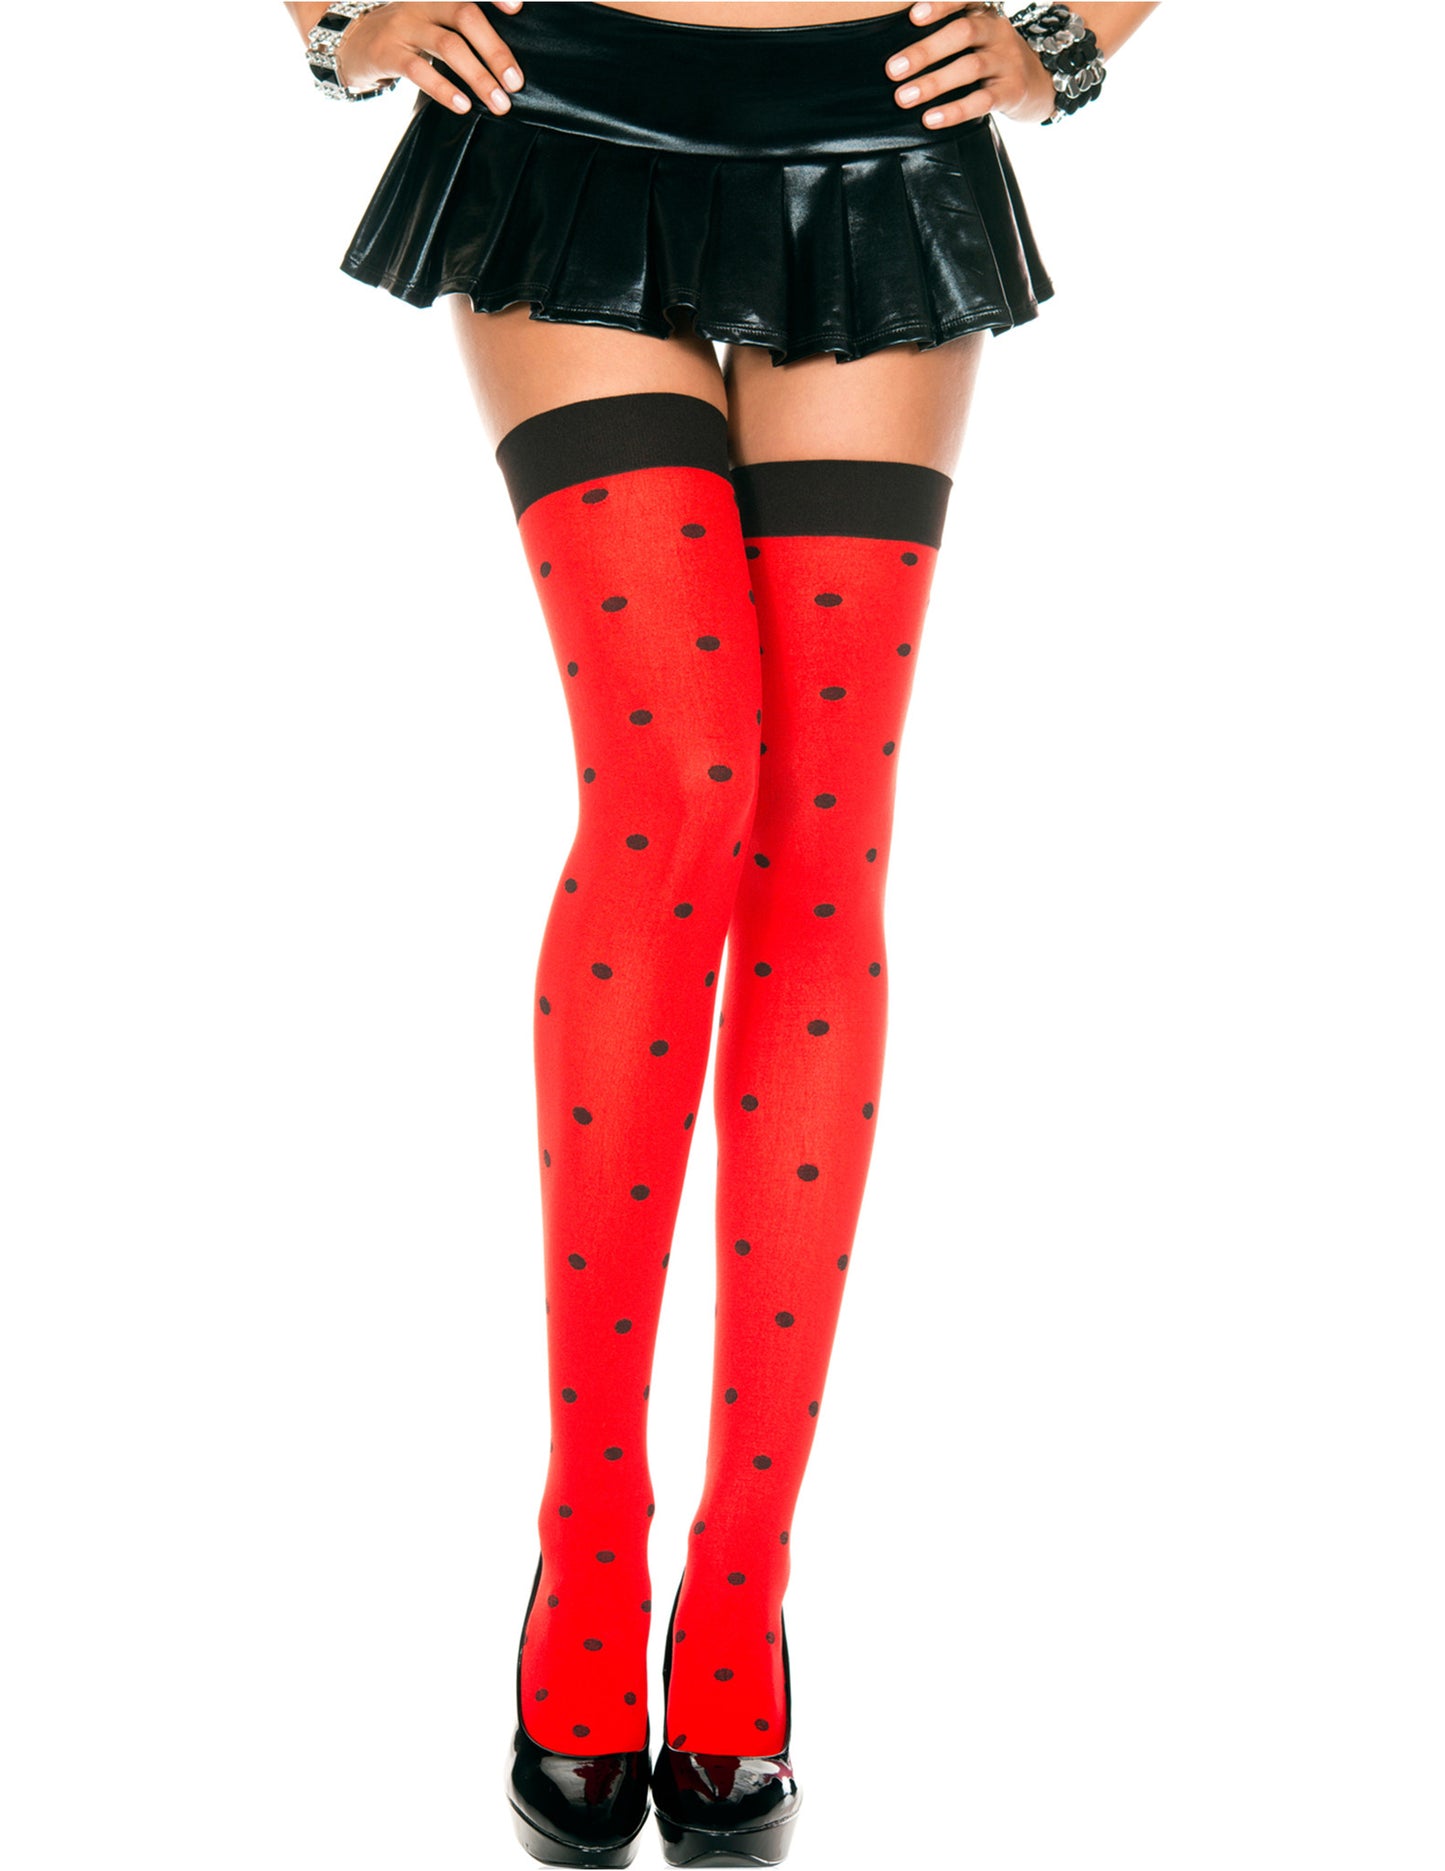 Red and Black Opaque Ladybug Thigh High Stockings, One Size